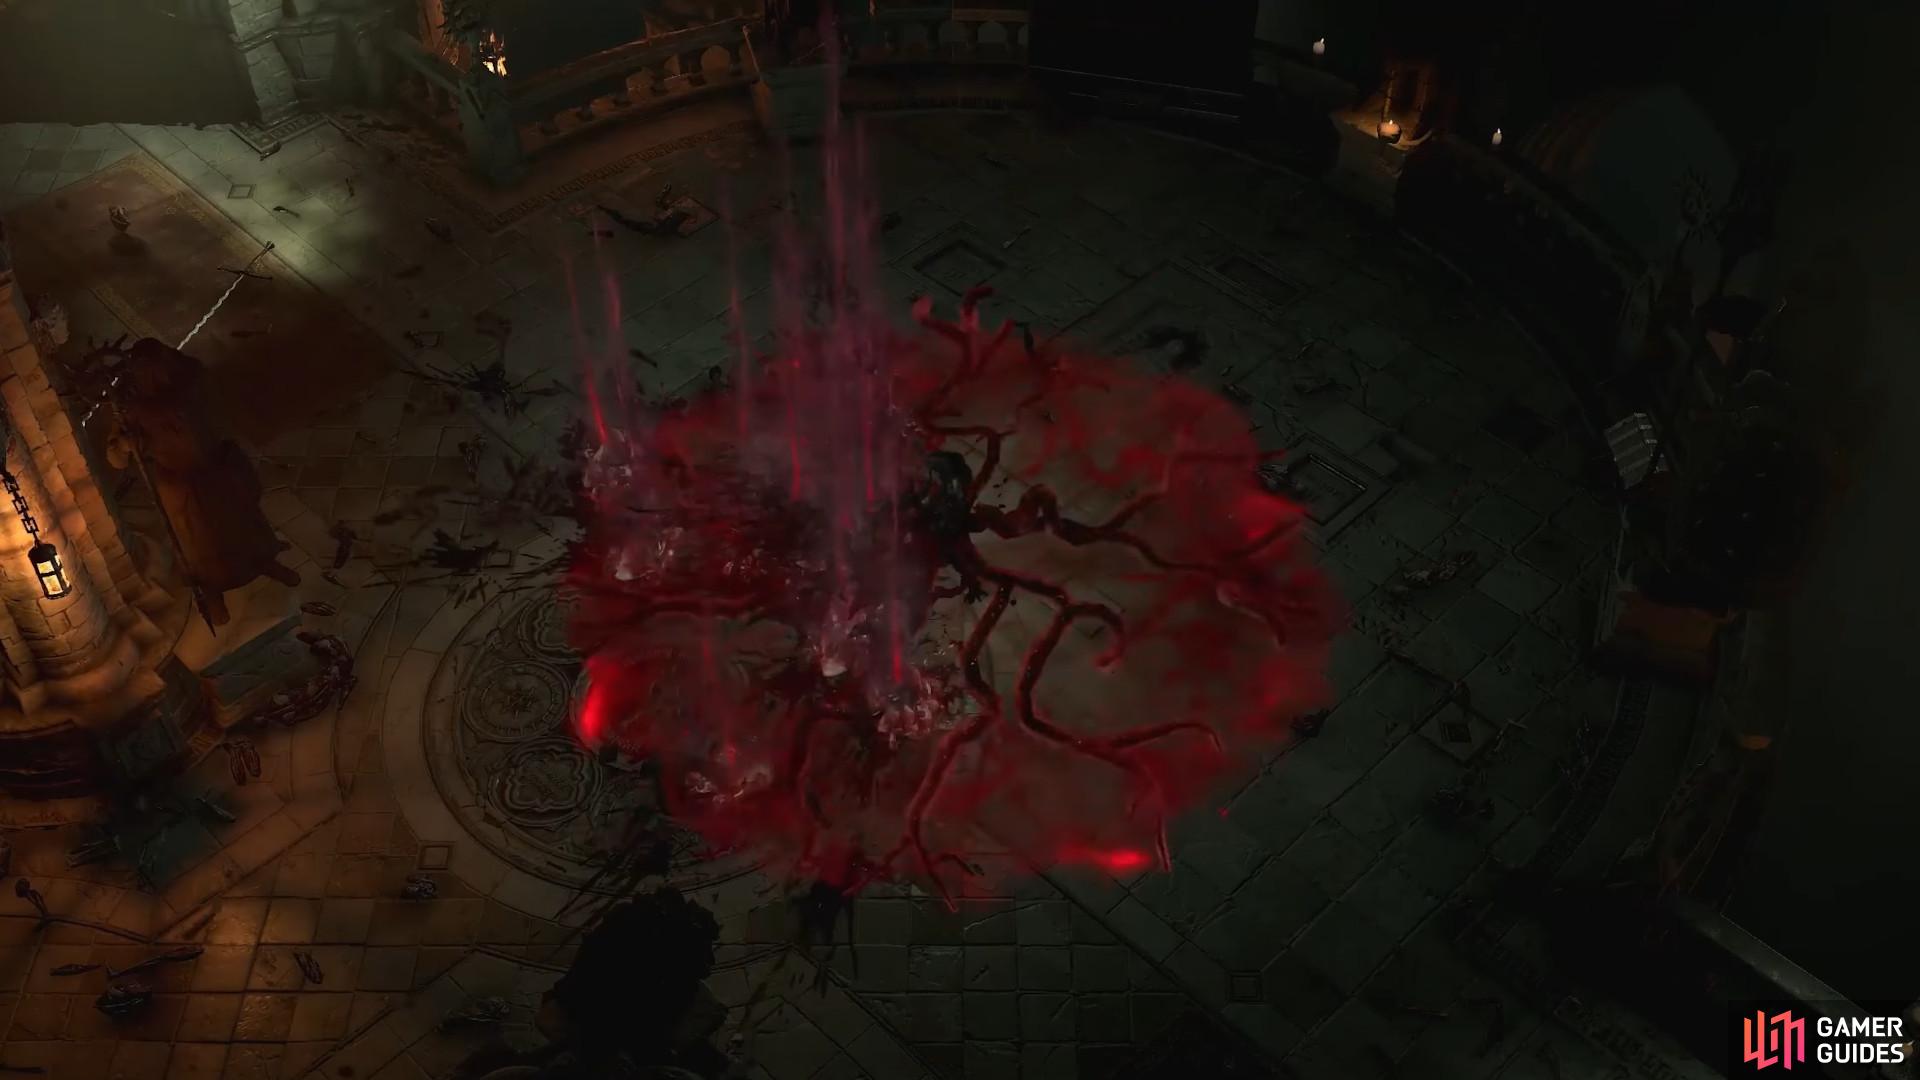 Use the power of Blood to fortify and Overpower yourself and enemies in this Necromancer Blood focused AOE build. Image via Blizzard Entertainment.